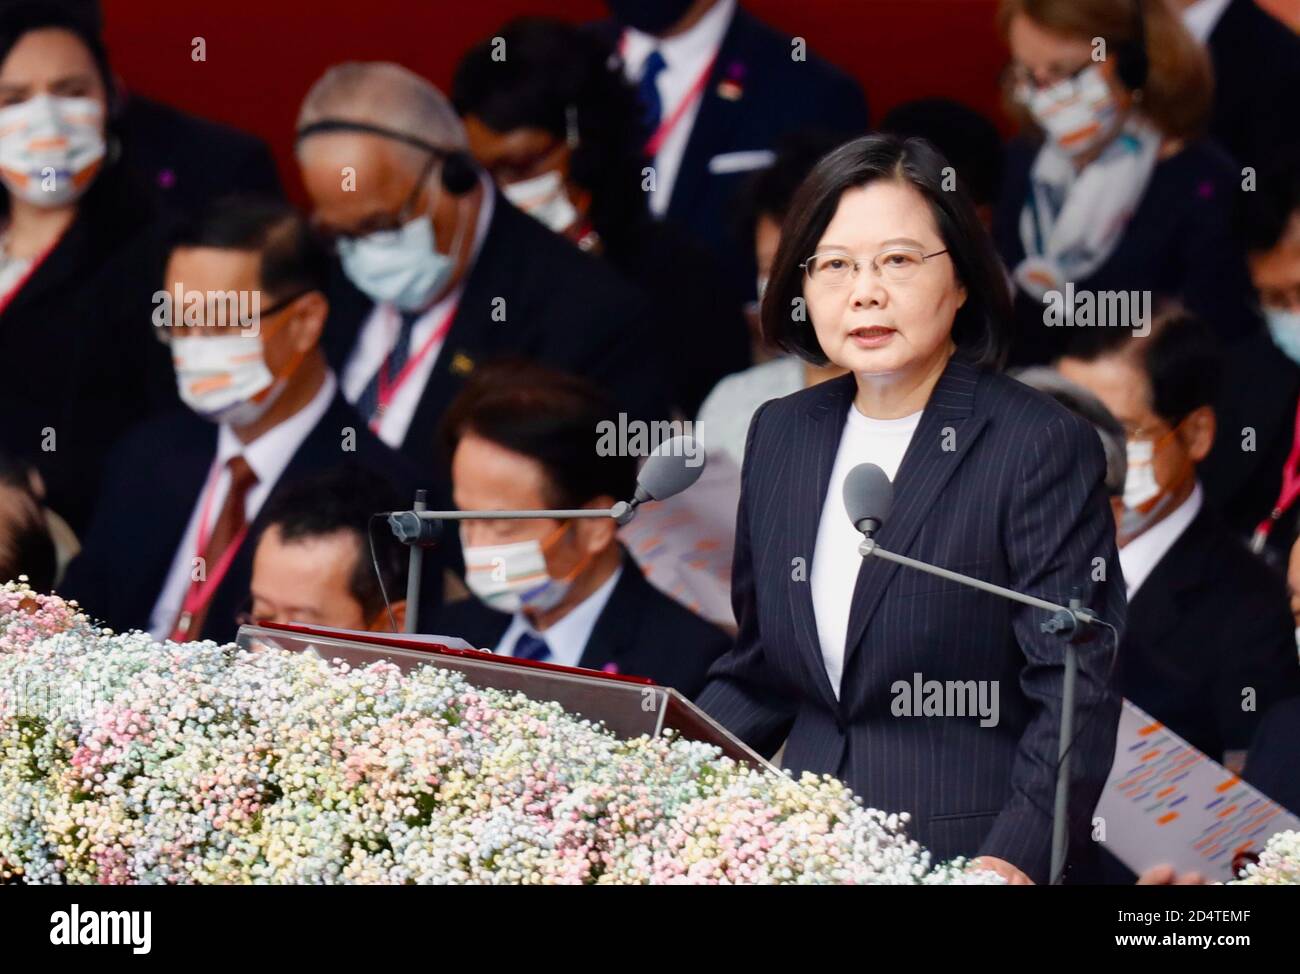 Taipei City, Taiwam. 10th Oct, 2020. Taiwan President Tsai Ing-wen delivers the 2020 national day address, as troops of honor guards parading, saluting for the 109th annivesary of the establishment of the country, in Taipei City, Taiwan, on 10 October 2020. In her speech, Tsai stressed her administration's determination to safeguard national security of theisland and outlined the country's post-pandemic economic strategies. (Ceng Shou Yi/ Credit: Sipa USA/Alamy Live News Stock Photo